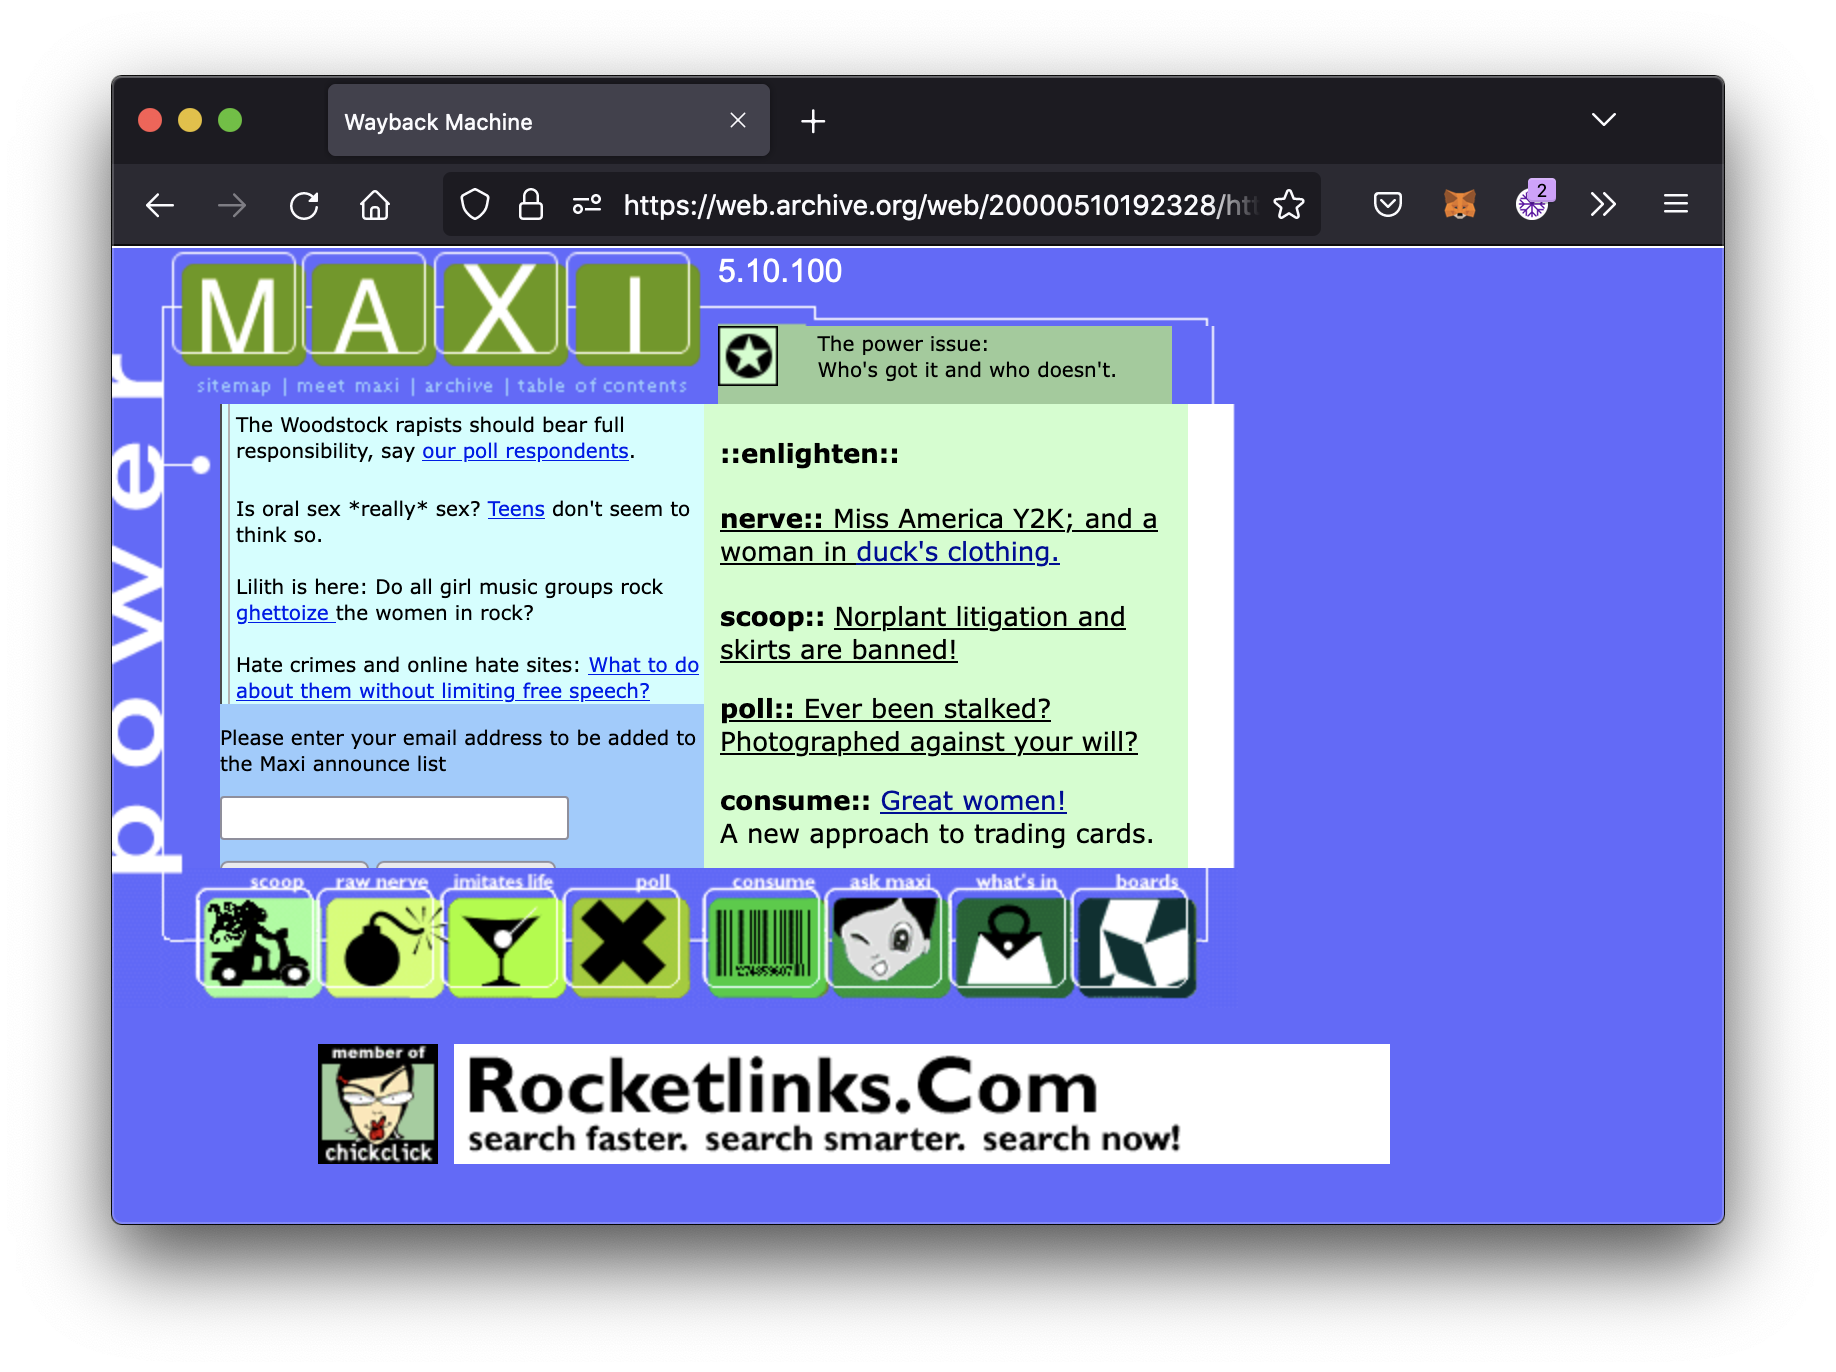 Maxi homepage is a purple-blue with green logos on the bottom of the page and two shades of green-centered panels with text